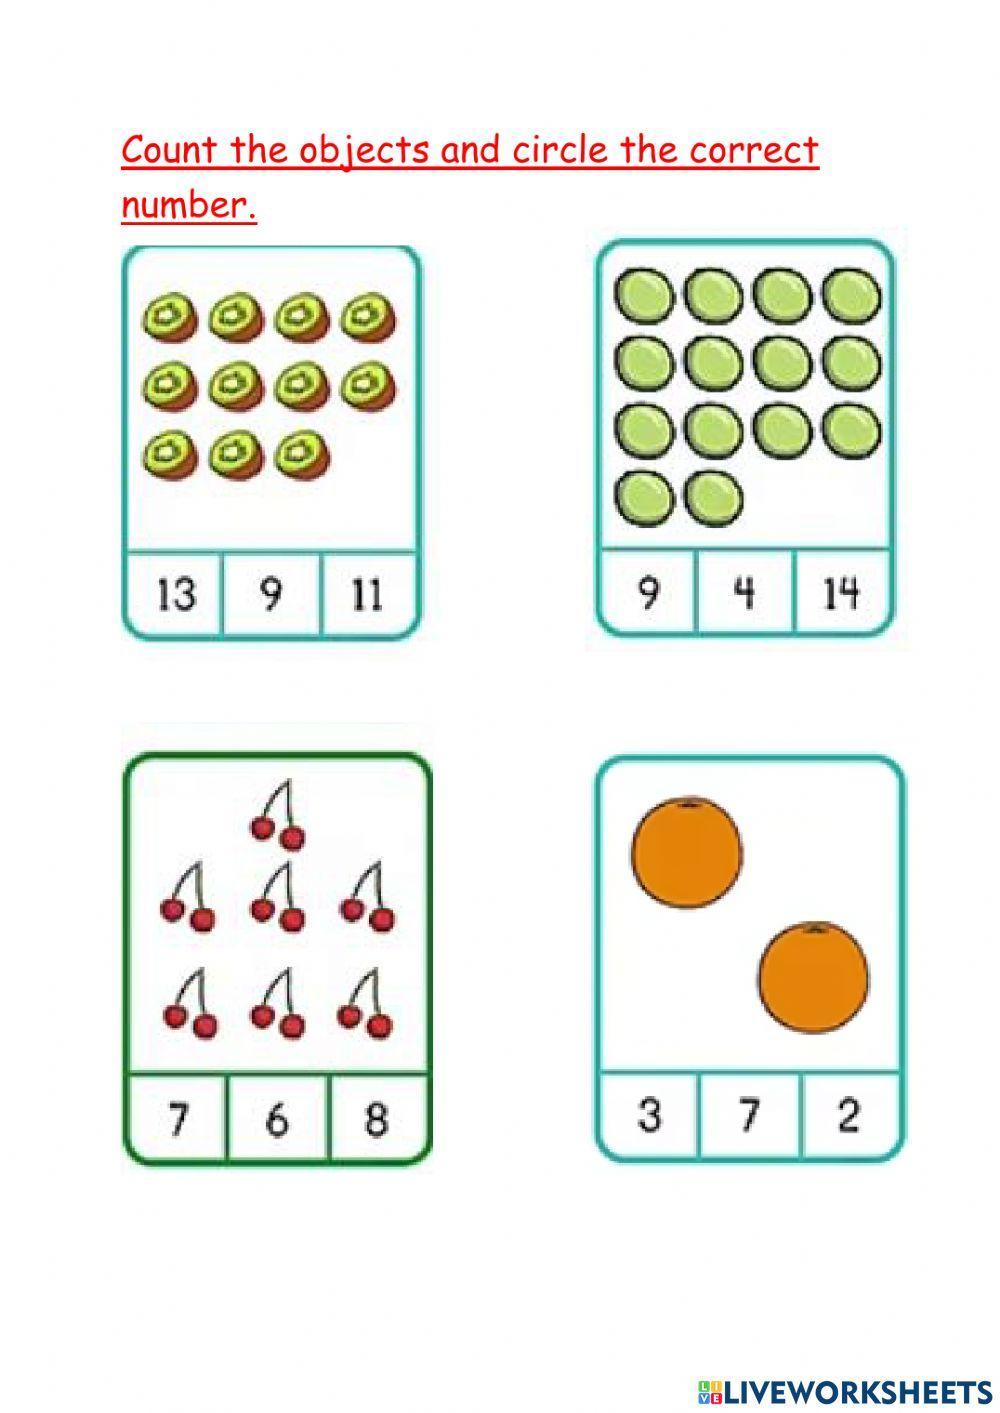 Counting Number 1-14